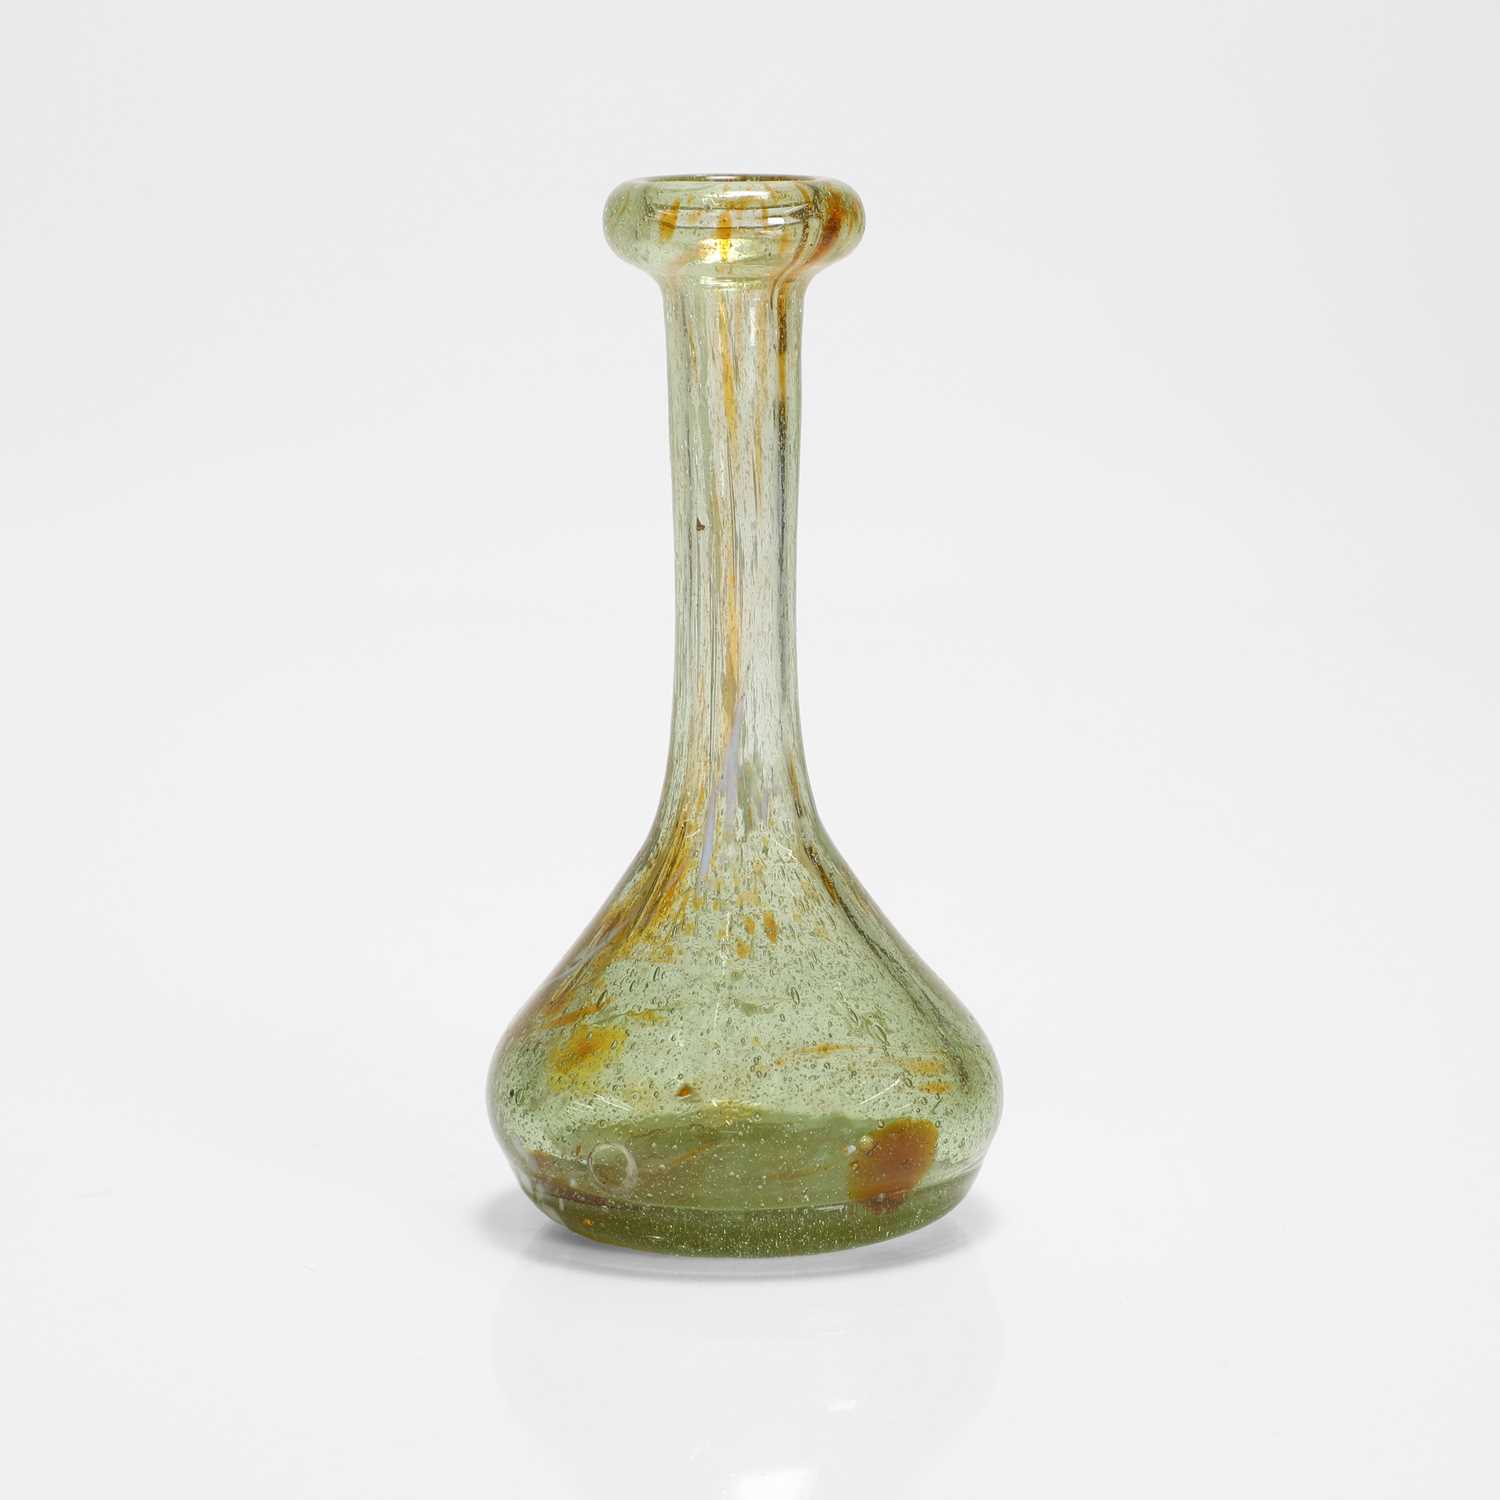 A James Couper & Sons 'Clutha' solifleur glass vase, - Image 3 of 7